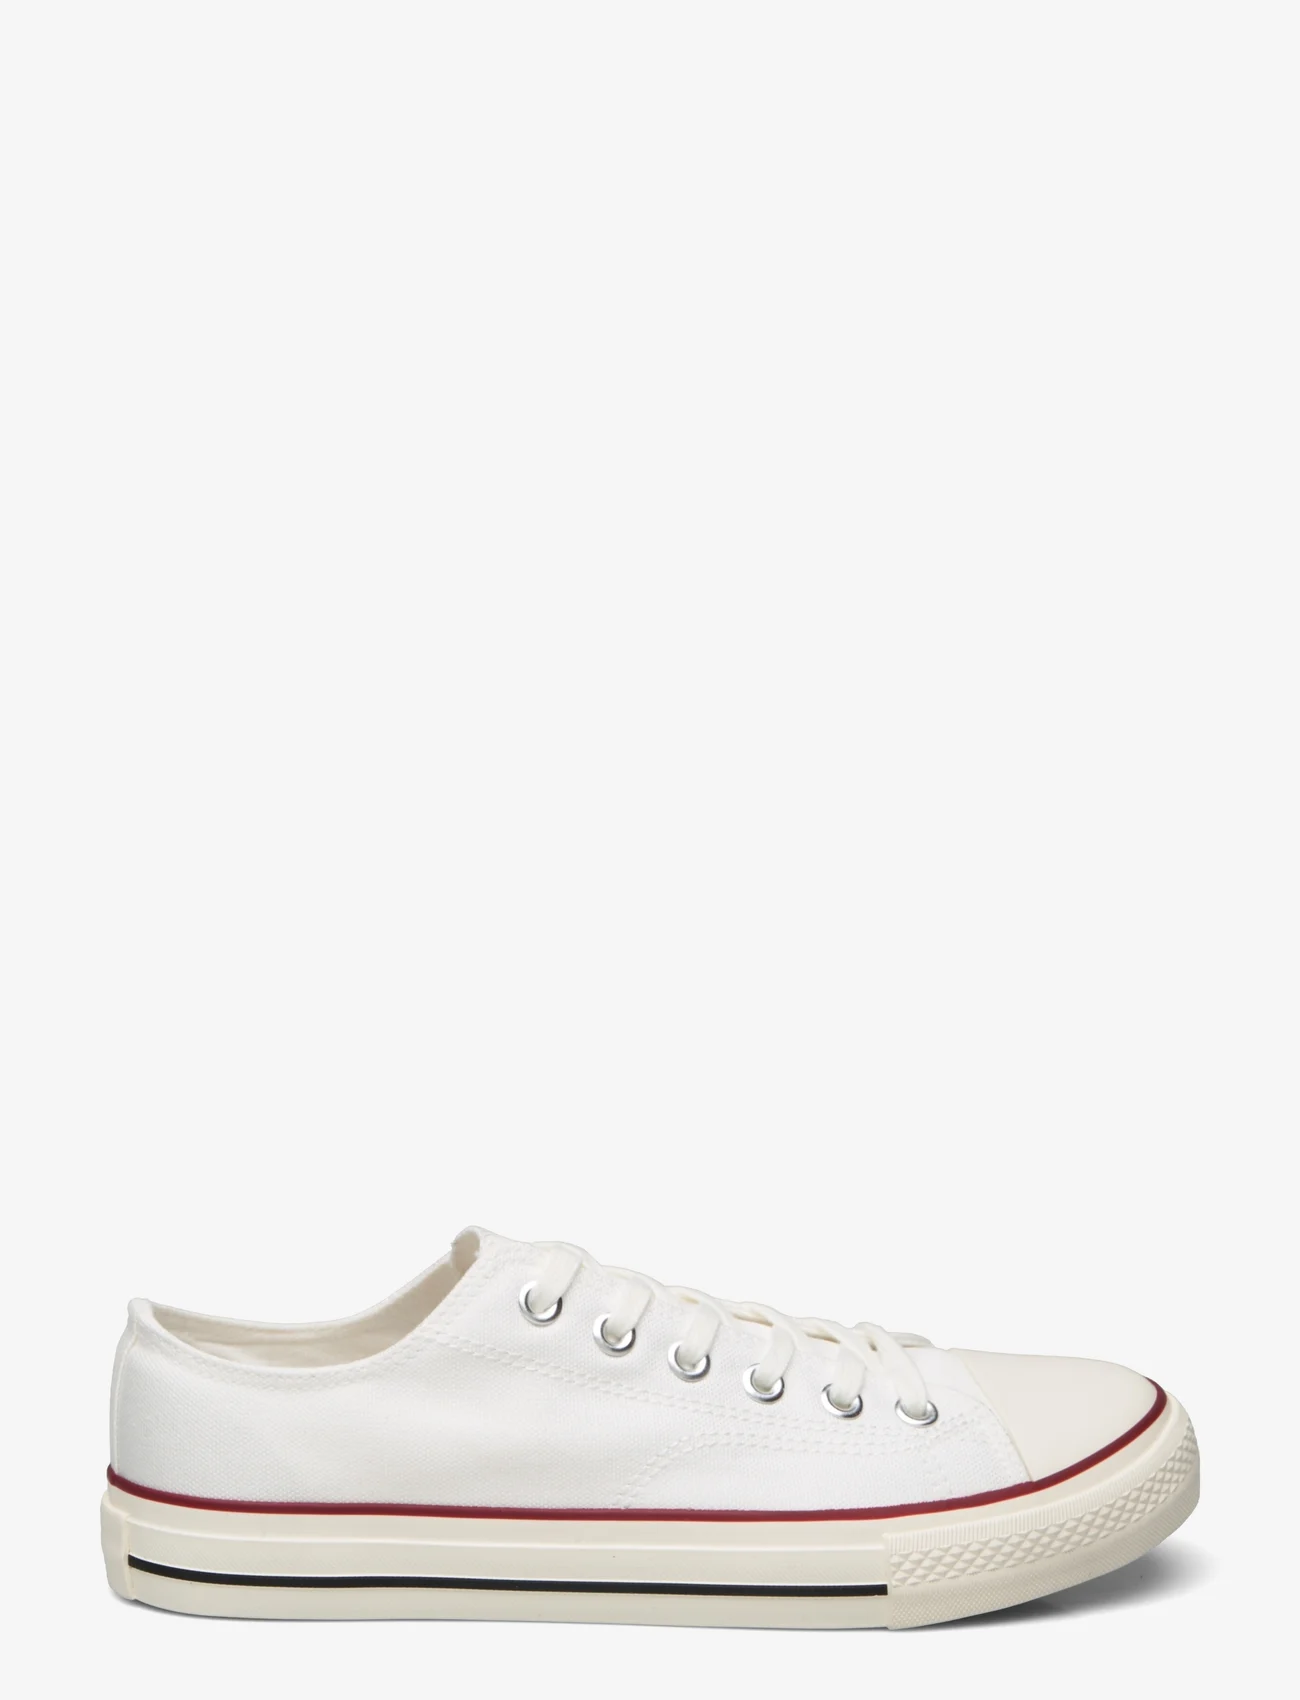 Exani - ANGELES LOW M - low tops - white - 1